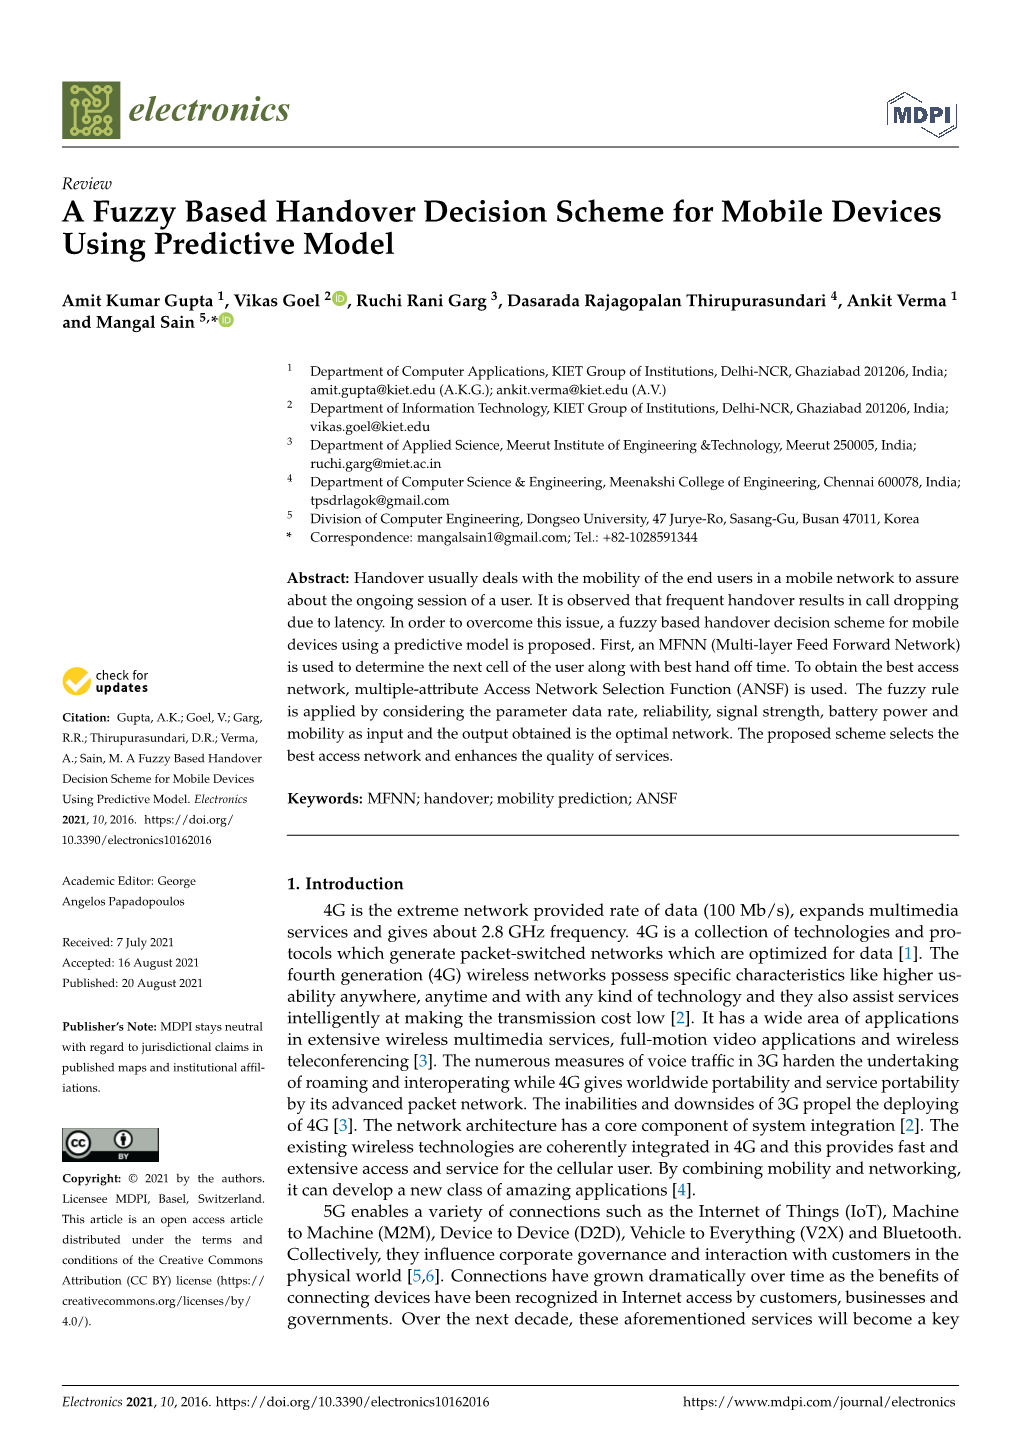 A Fuzzy Based Handover Decision Scheme for Mobile Devices Using Predictive Model